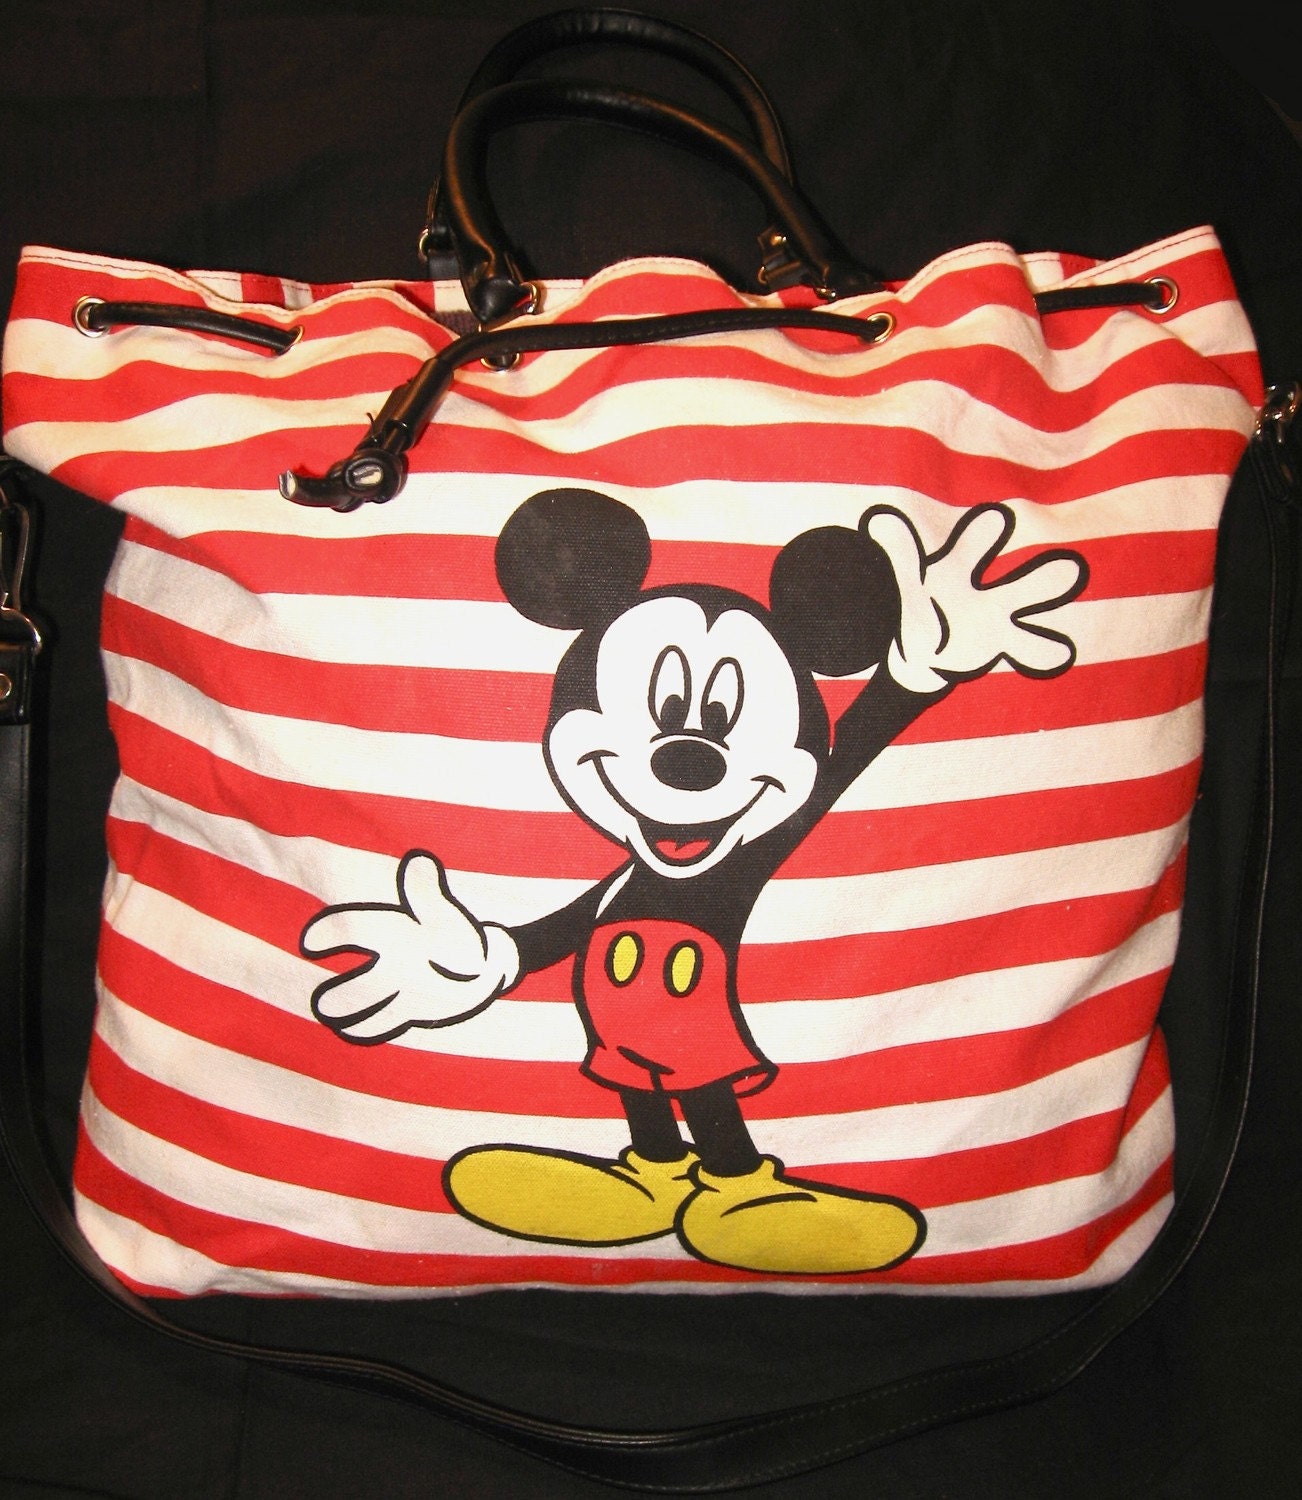 Mickey mouse tote bag